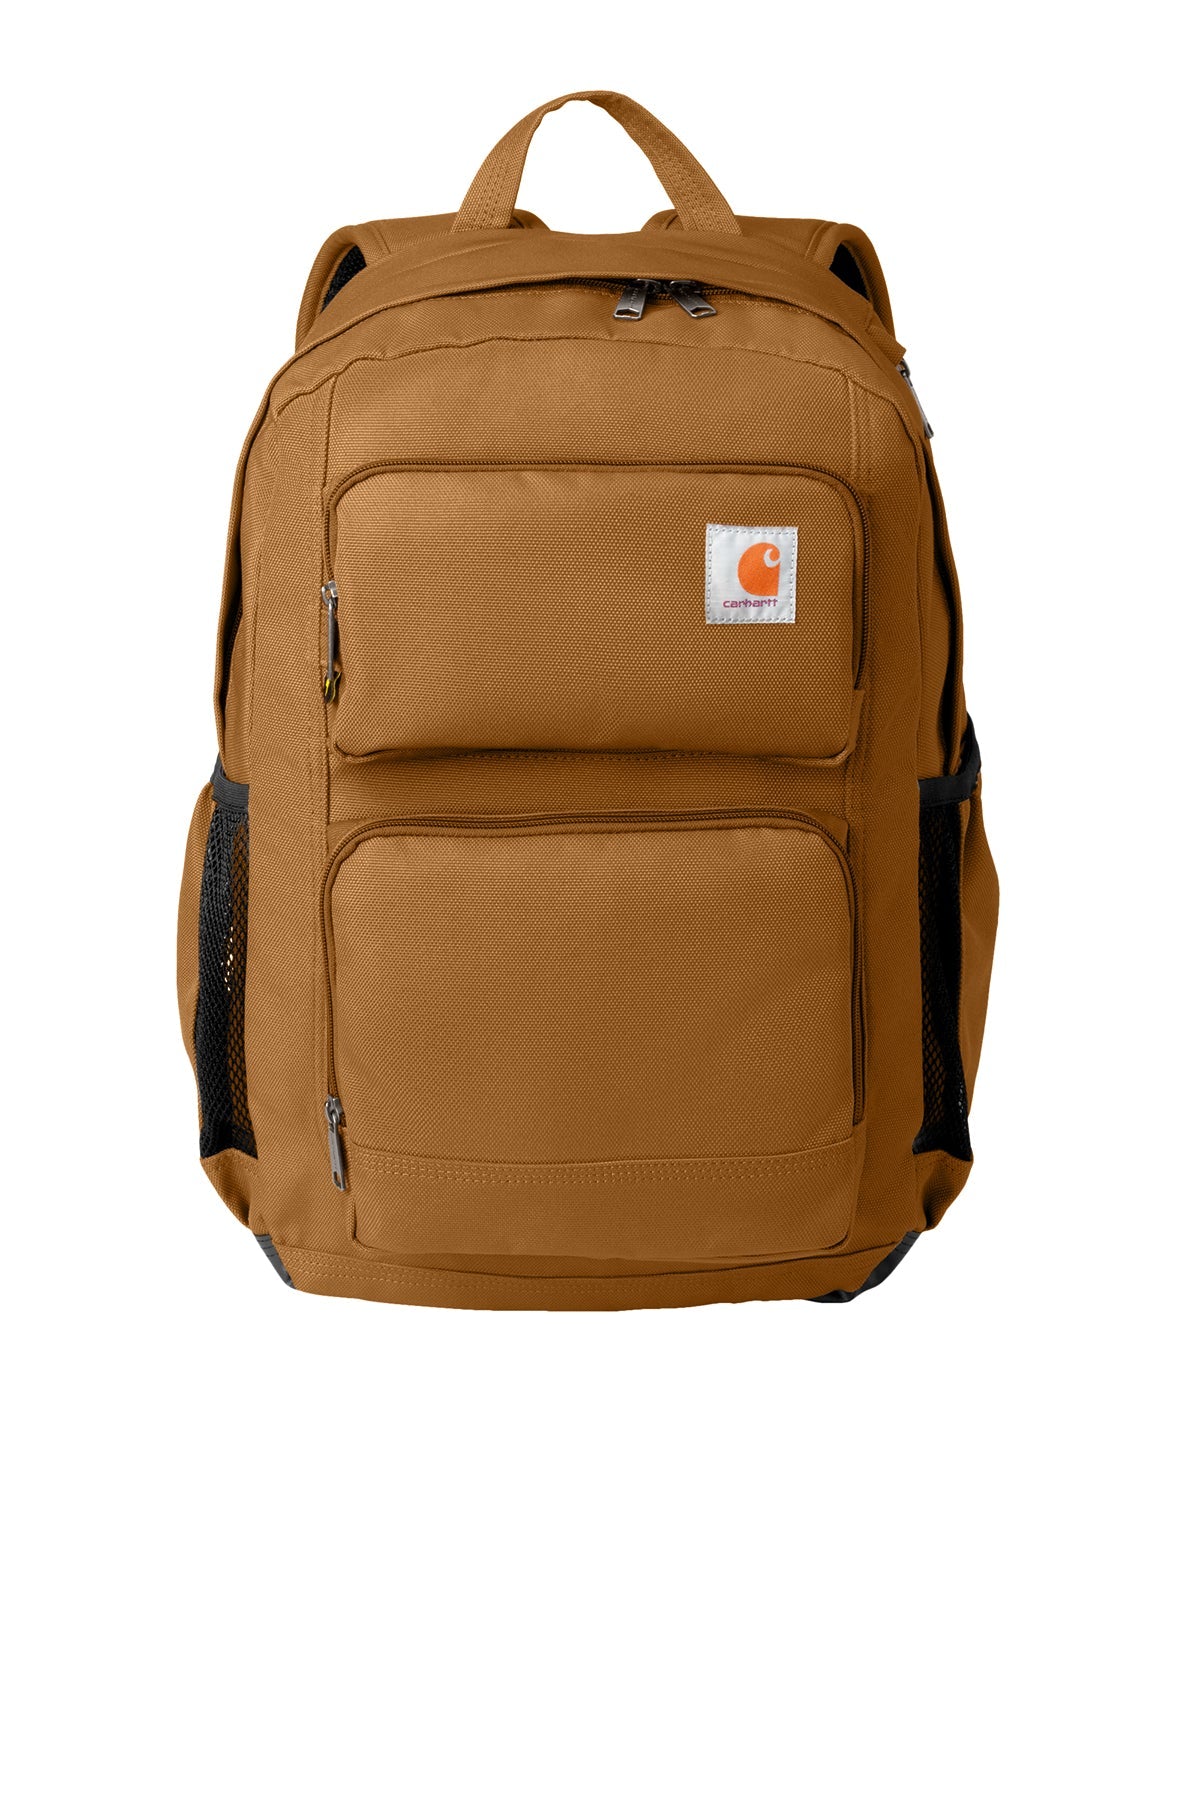 CTB0000486 Carhartt ® 28L Foundry Series Dual-Compartment Backpack